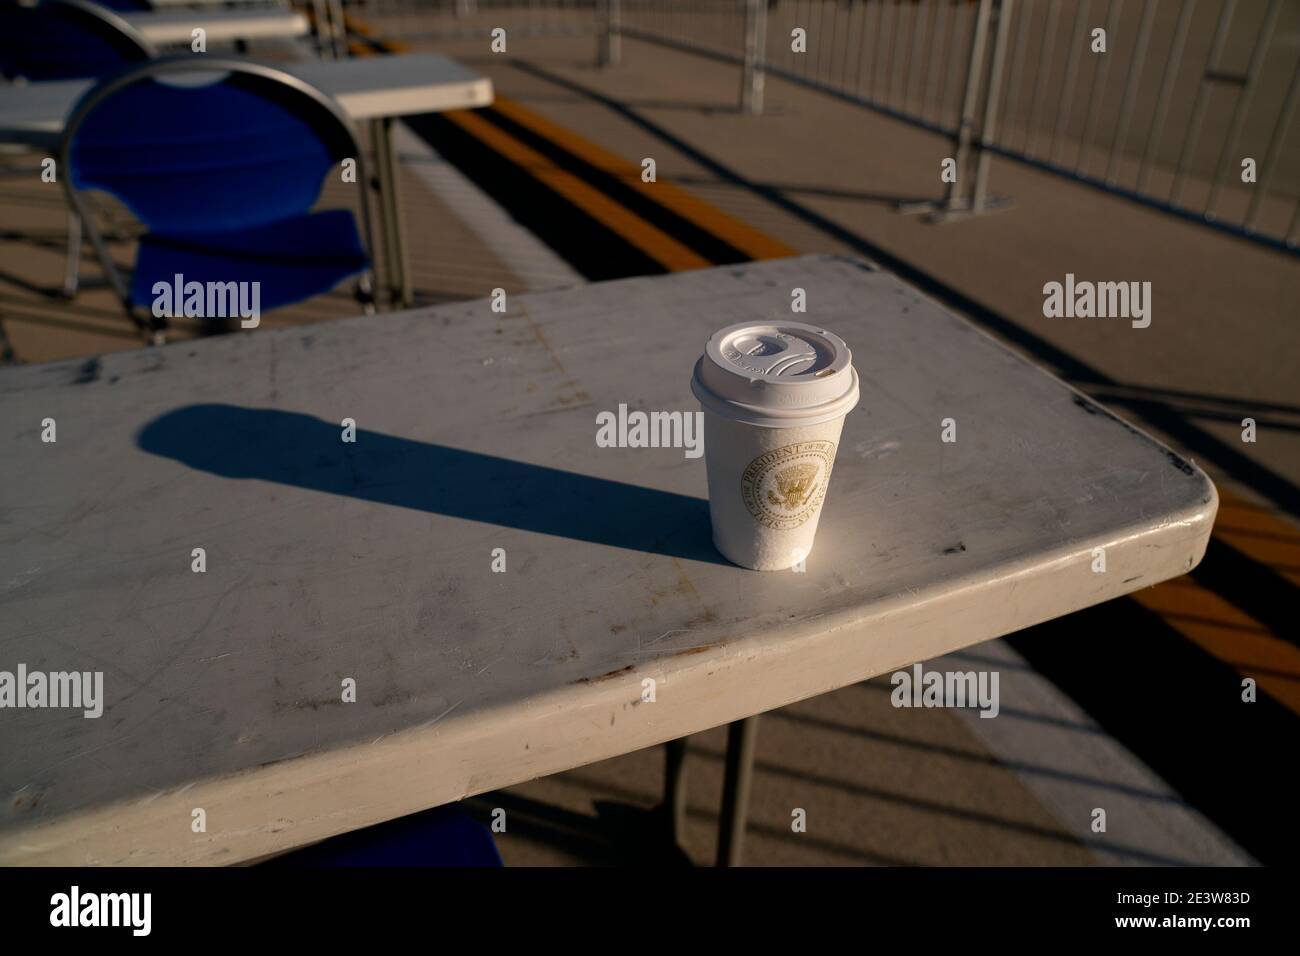 A cup with the Presidential seal on it is left behind following a farewell ceremony at Joint Base Andrews, Maryland, U.S., on Wednesday, Jan. 20, 2021. Trump departs Washington with Americans more politically divided and more likely to be out of work than when he arrived, while awaiting trial for his second impeachment - an ignominious end to one of the most turbulent presidencies in American history. Photographer: Stefani Reynolds/Bloomberg/MediaPunch Stock Photo